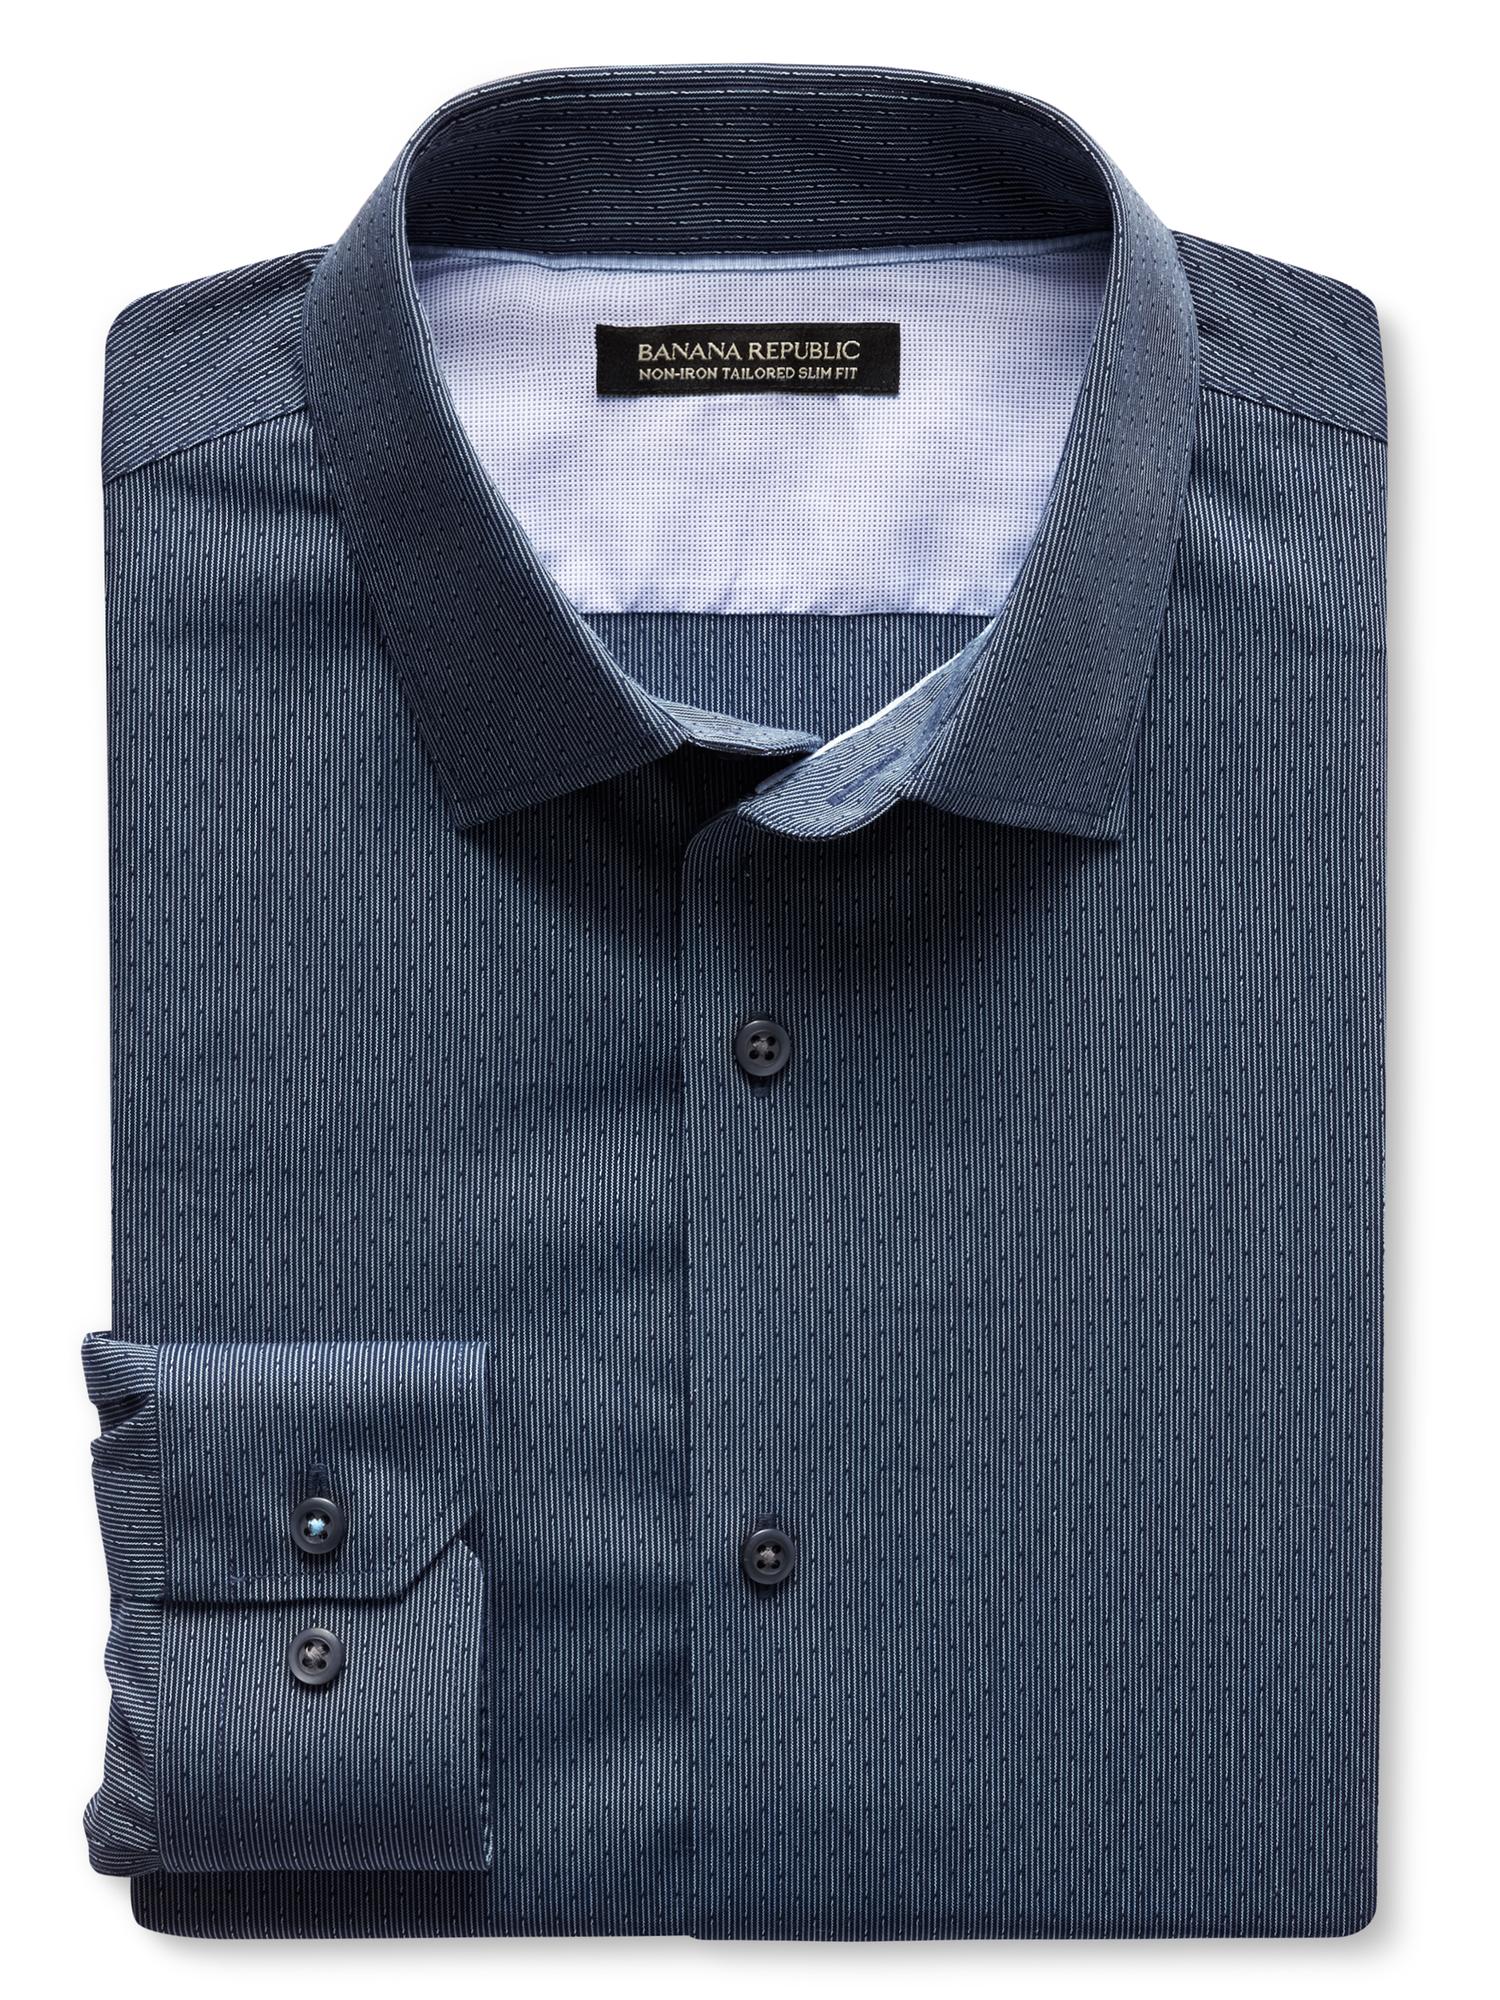 Grant-Fit Non-Iron Navy Corded Shirt